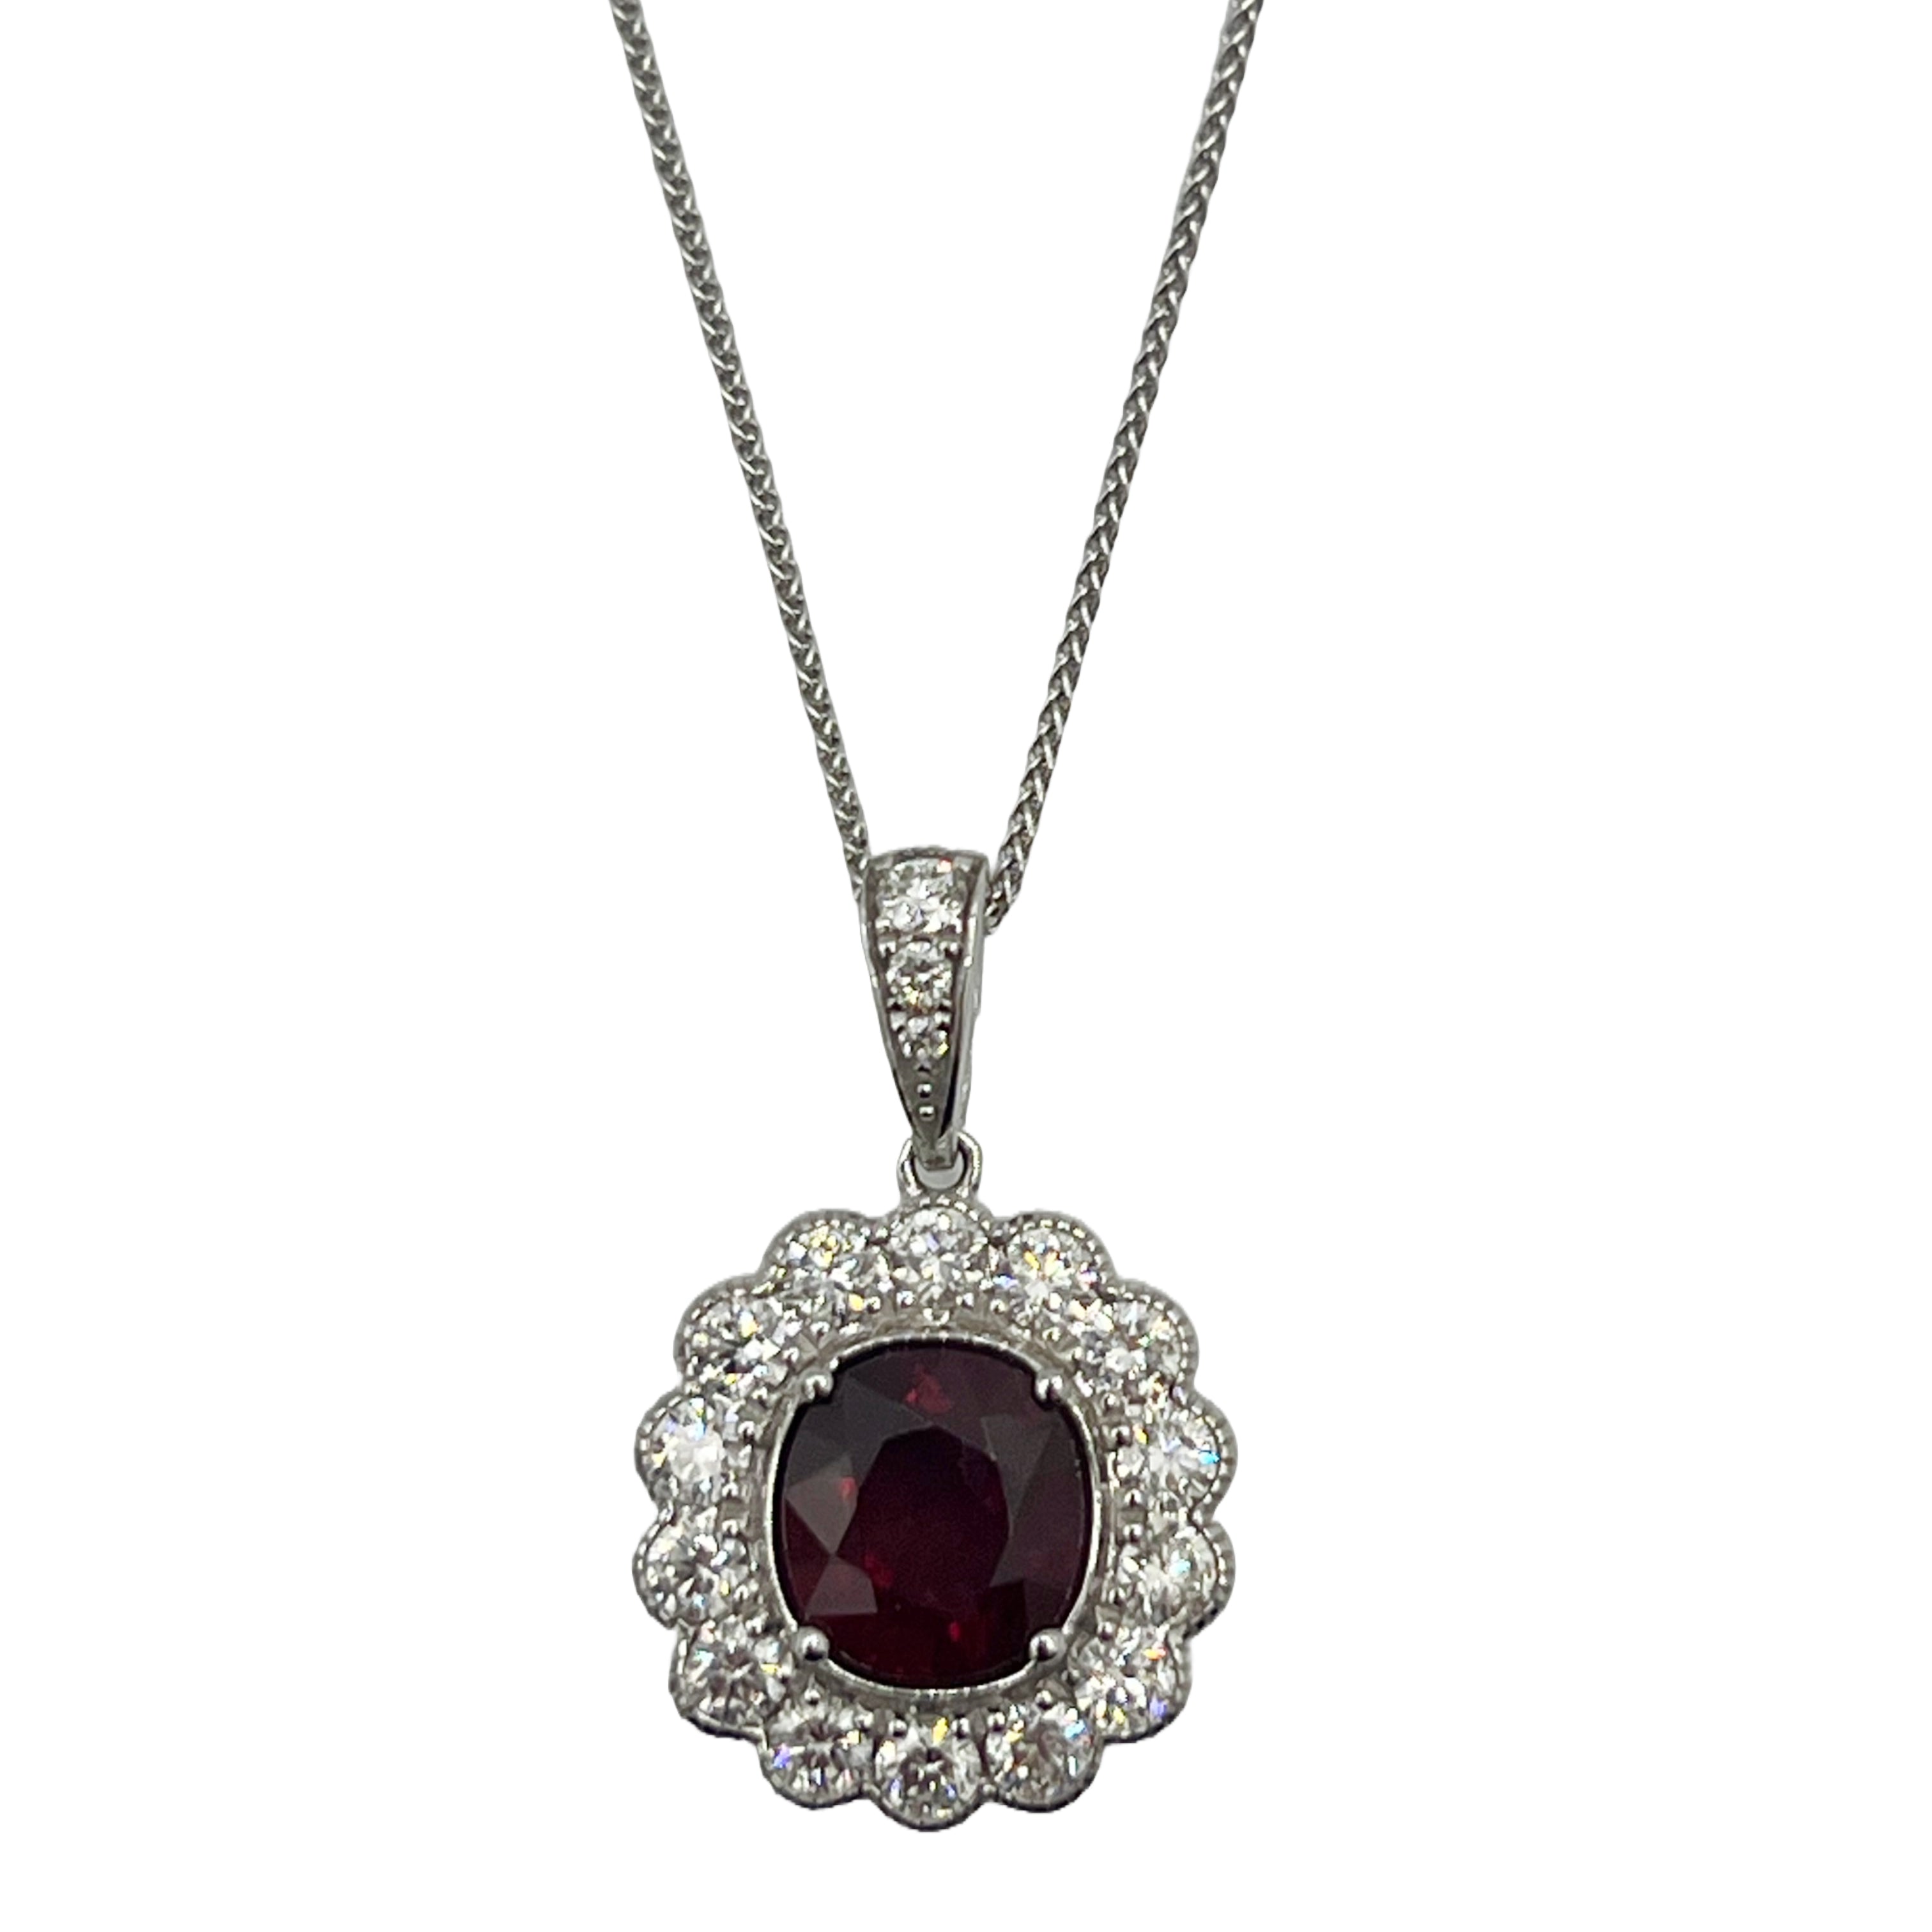 Pendant 18KW/3.4G 1RUBY-2.73CT 17RD-0.99CT